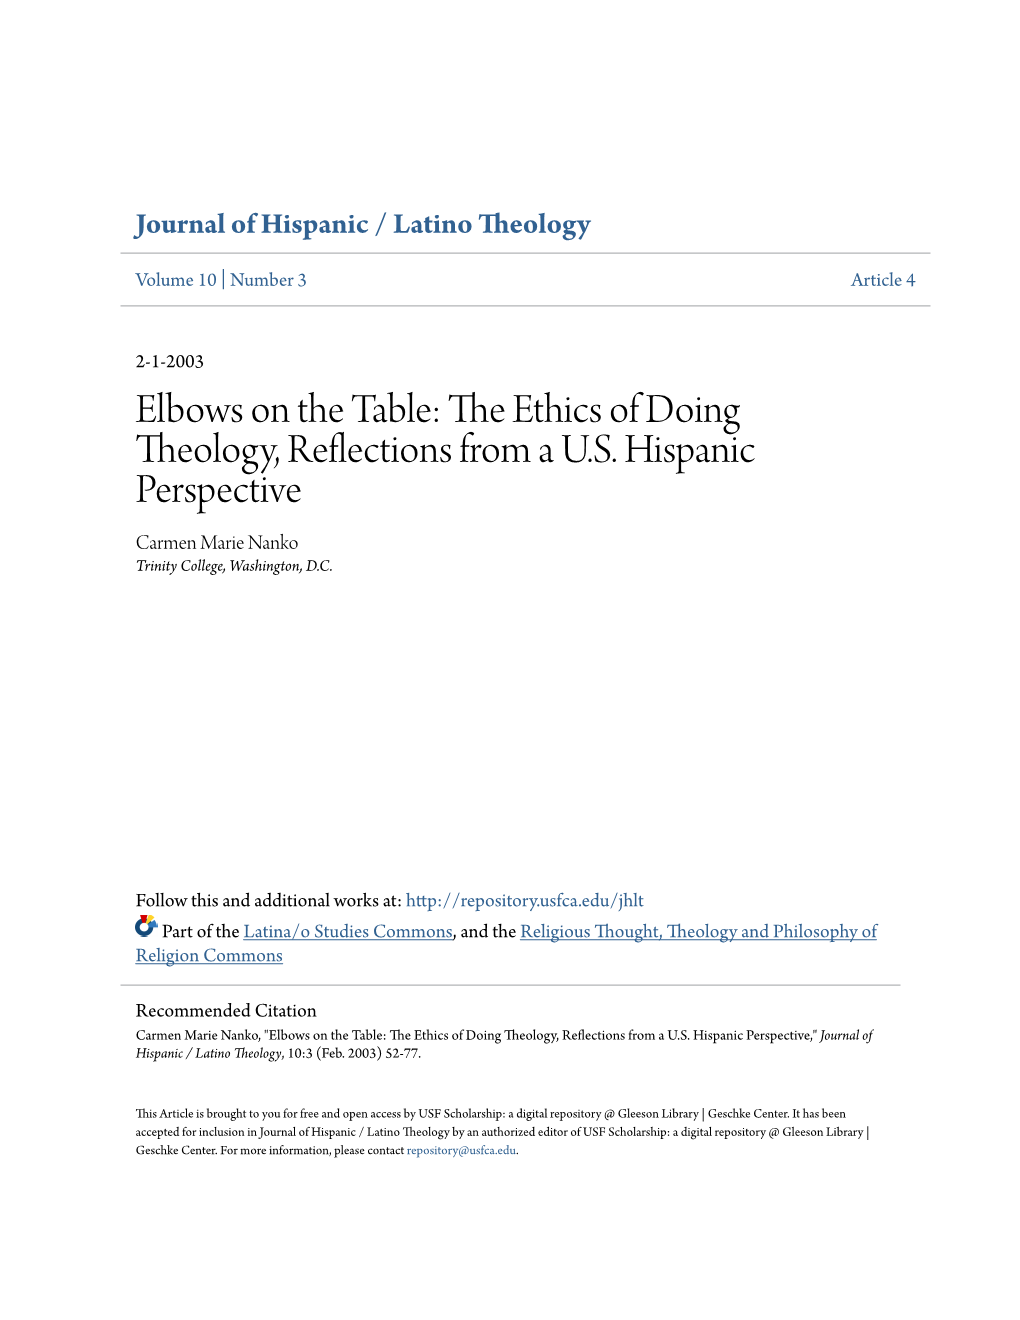 The Ethics of Doing Theology, Reflections from a US Hispanic